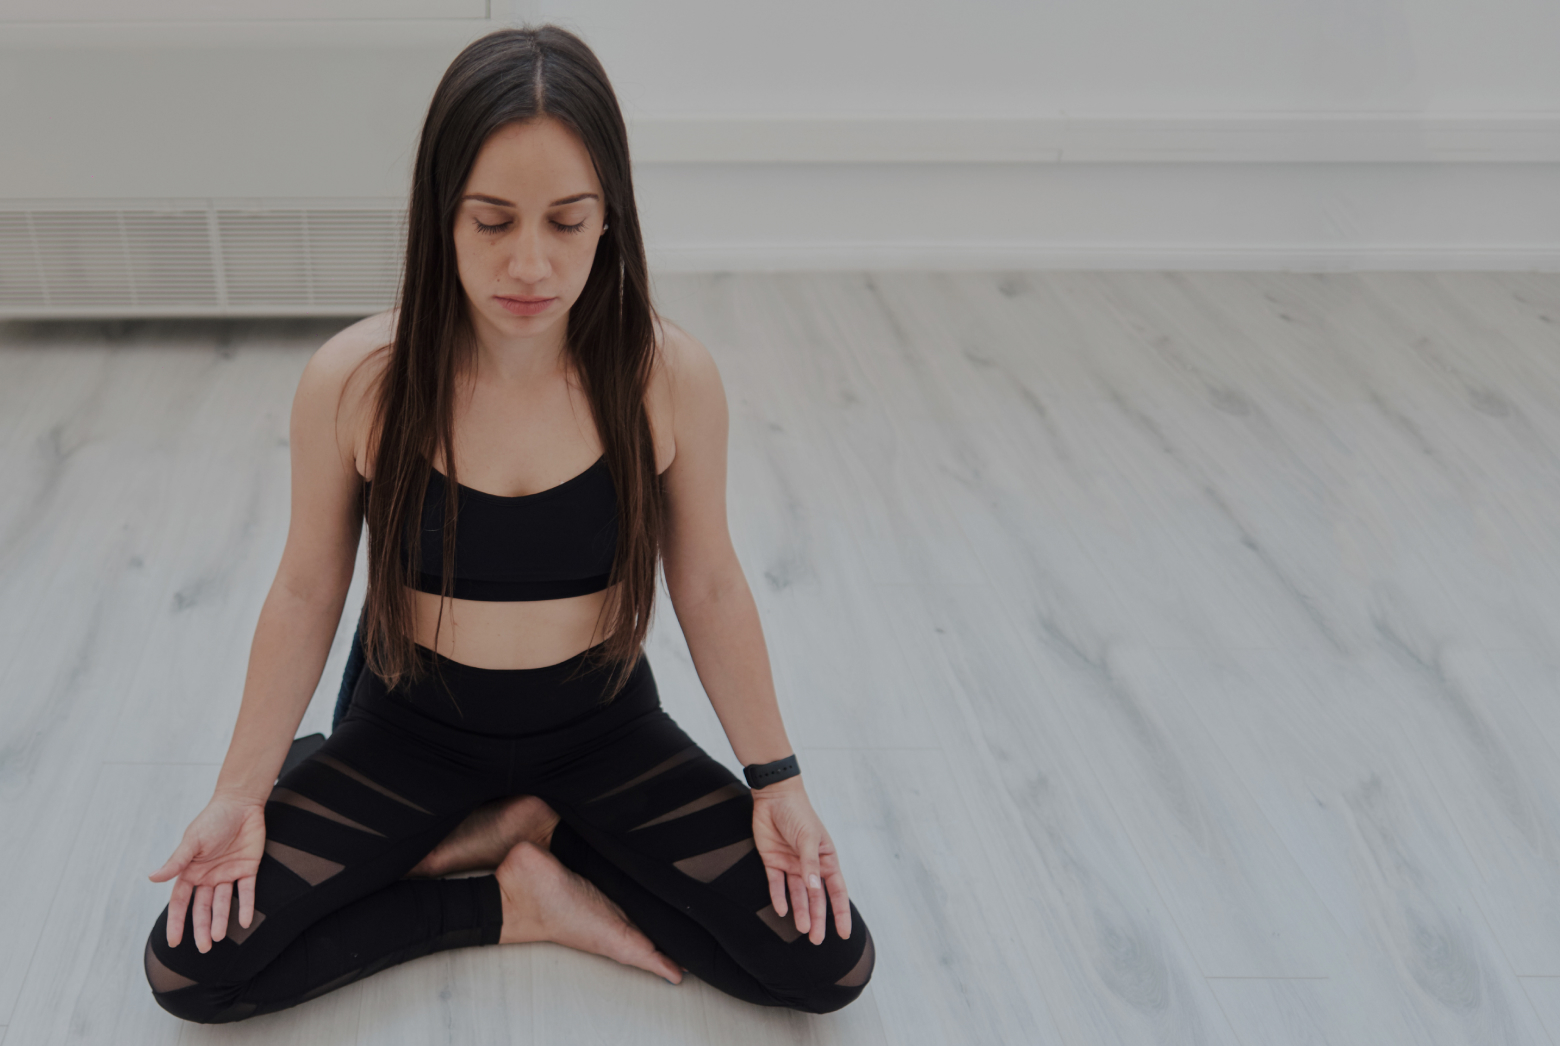 how can meditation help your anxiety